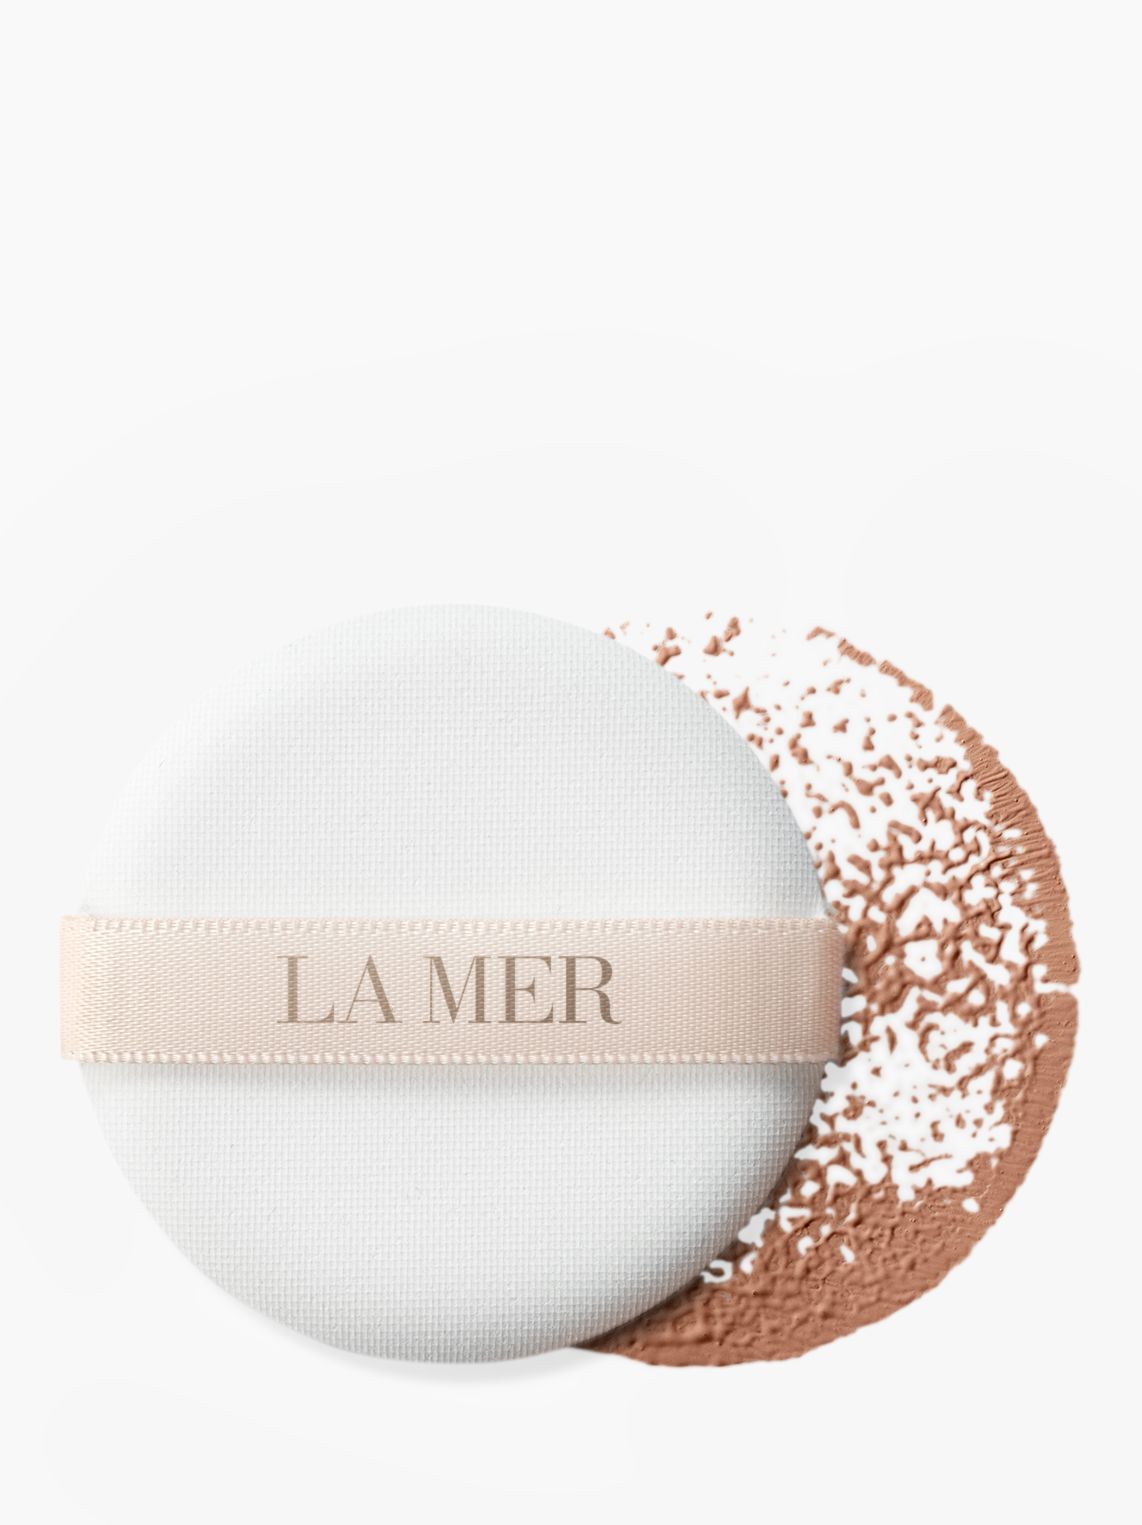 La Mer Cushion Compact Foundation, Pink Bisque 2